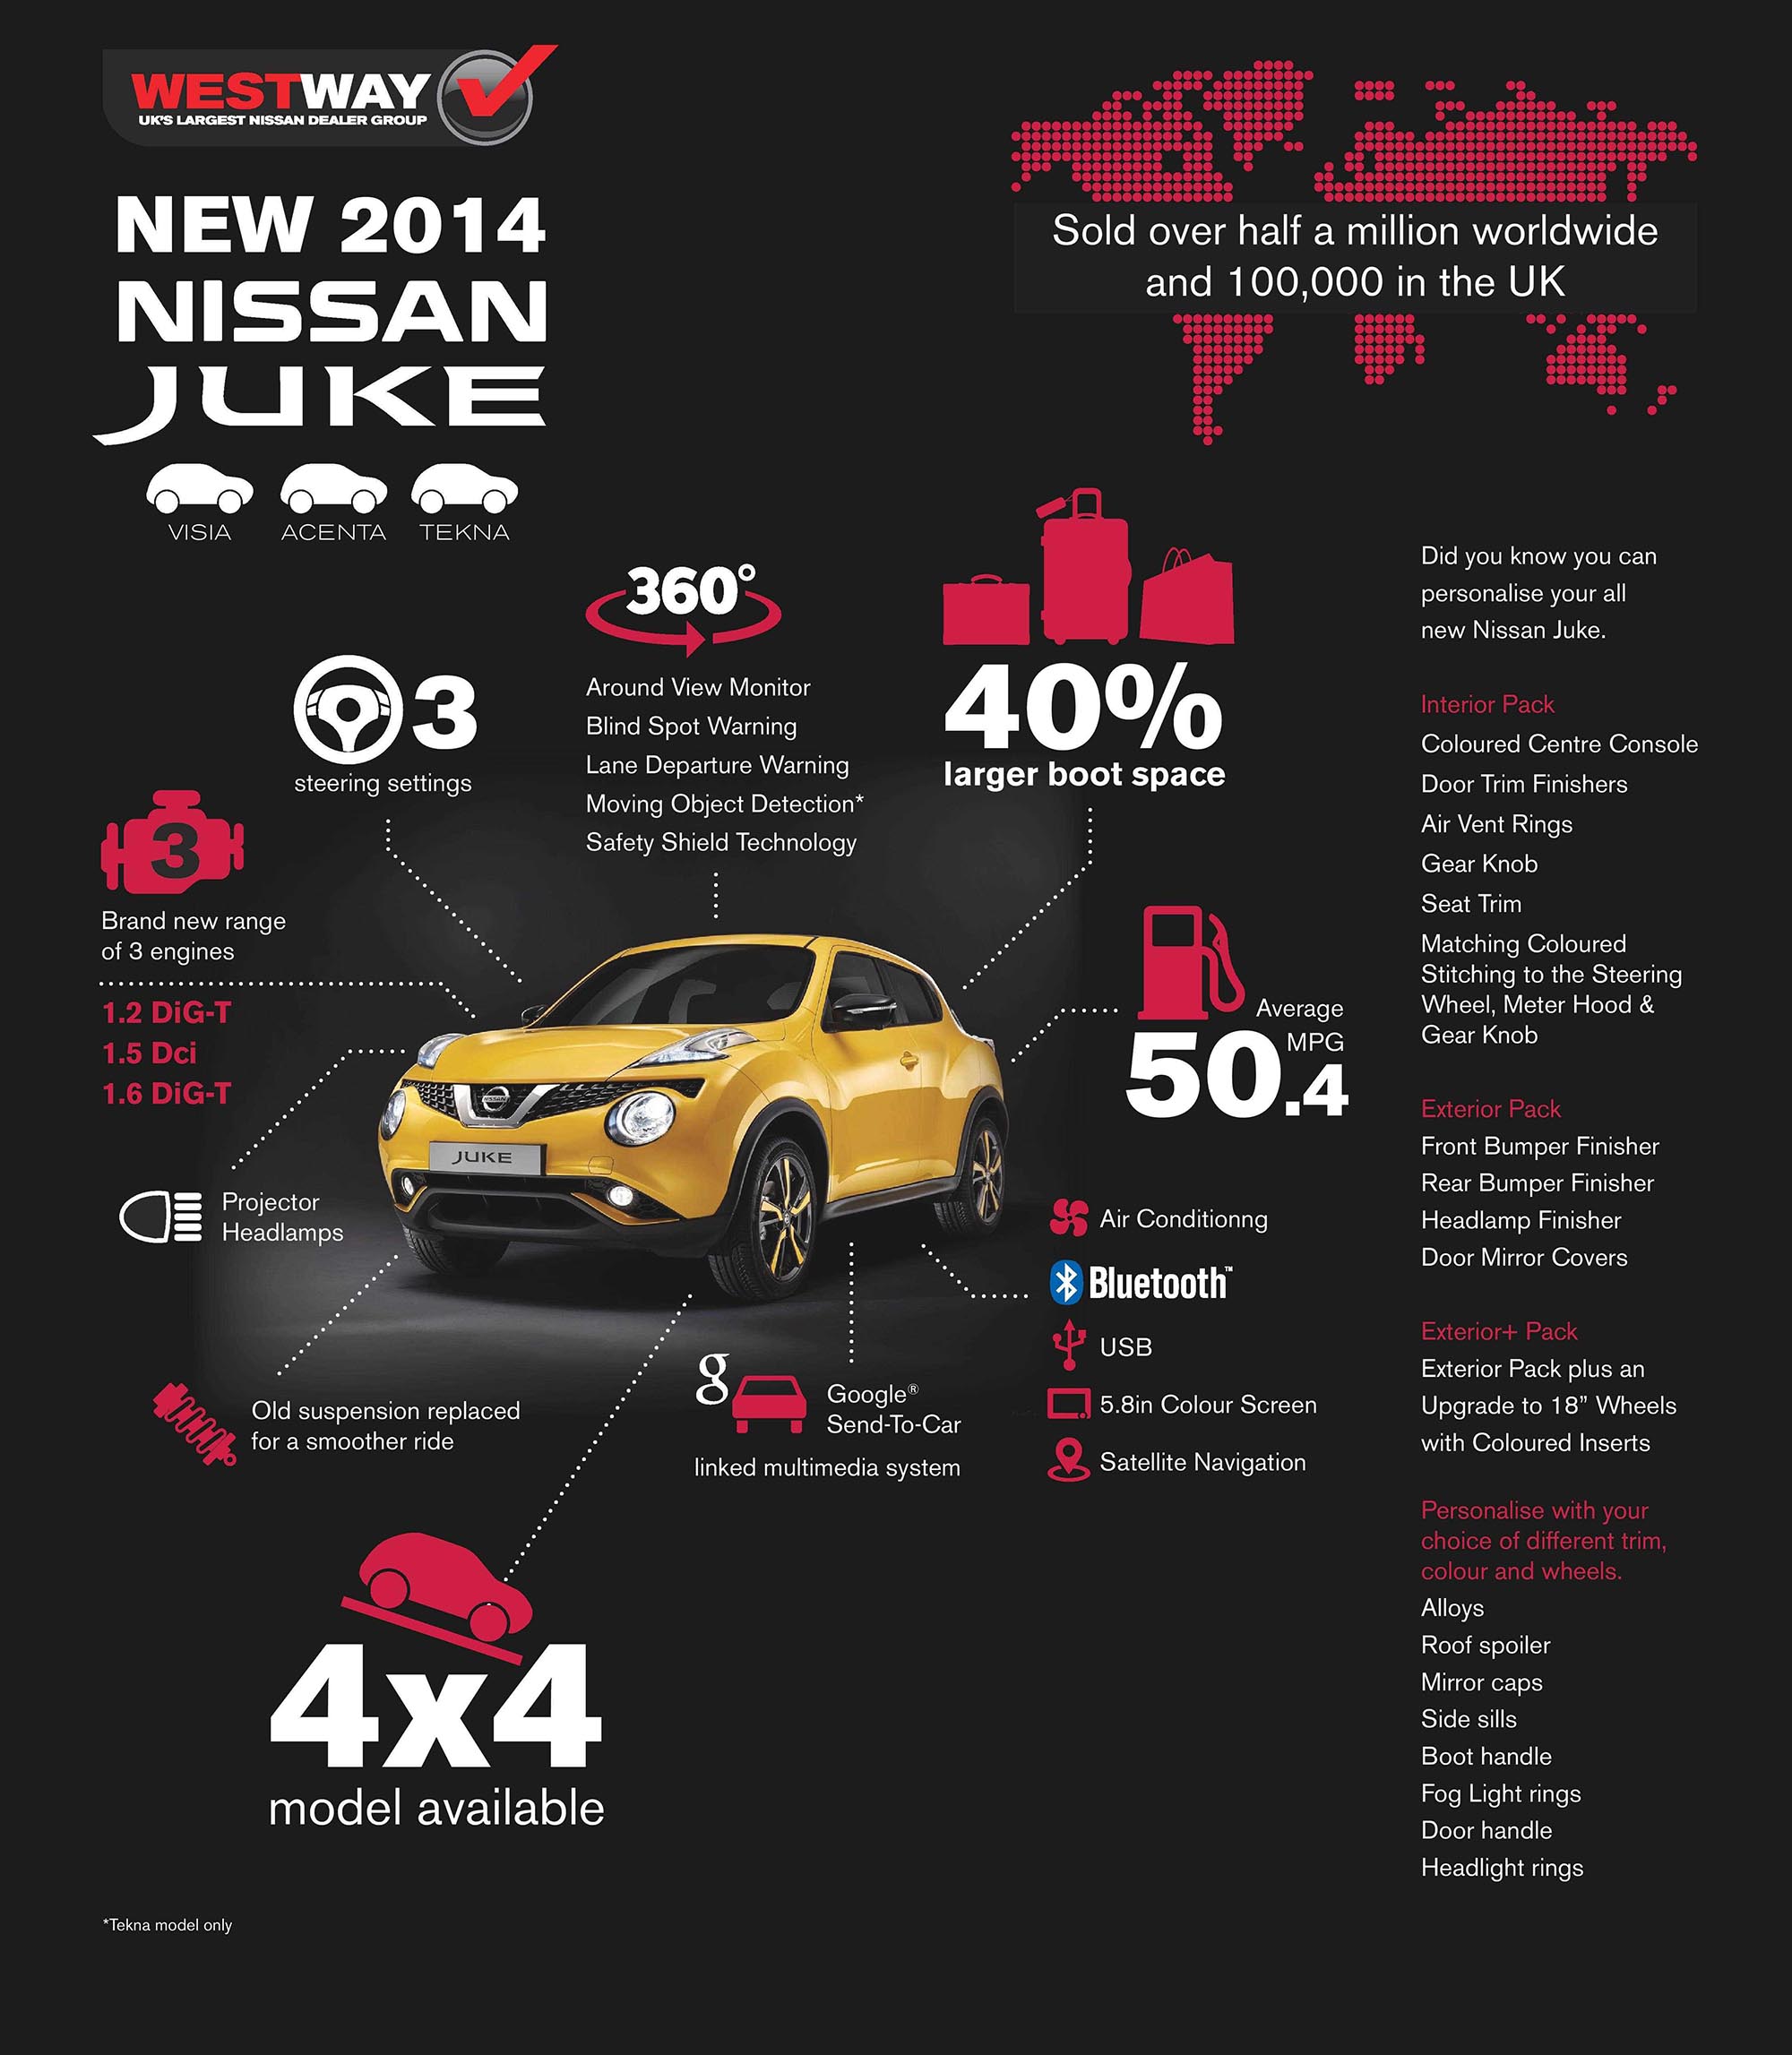 What's New on the 2014 Juke?